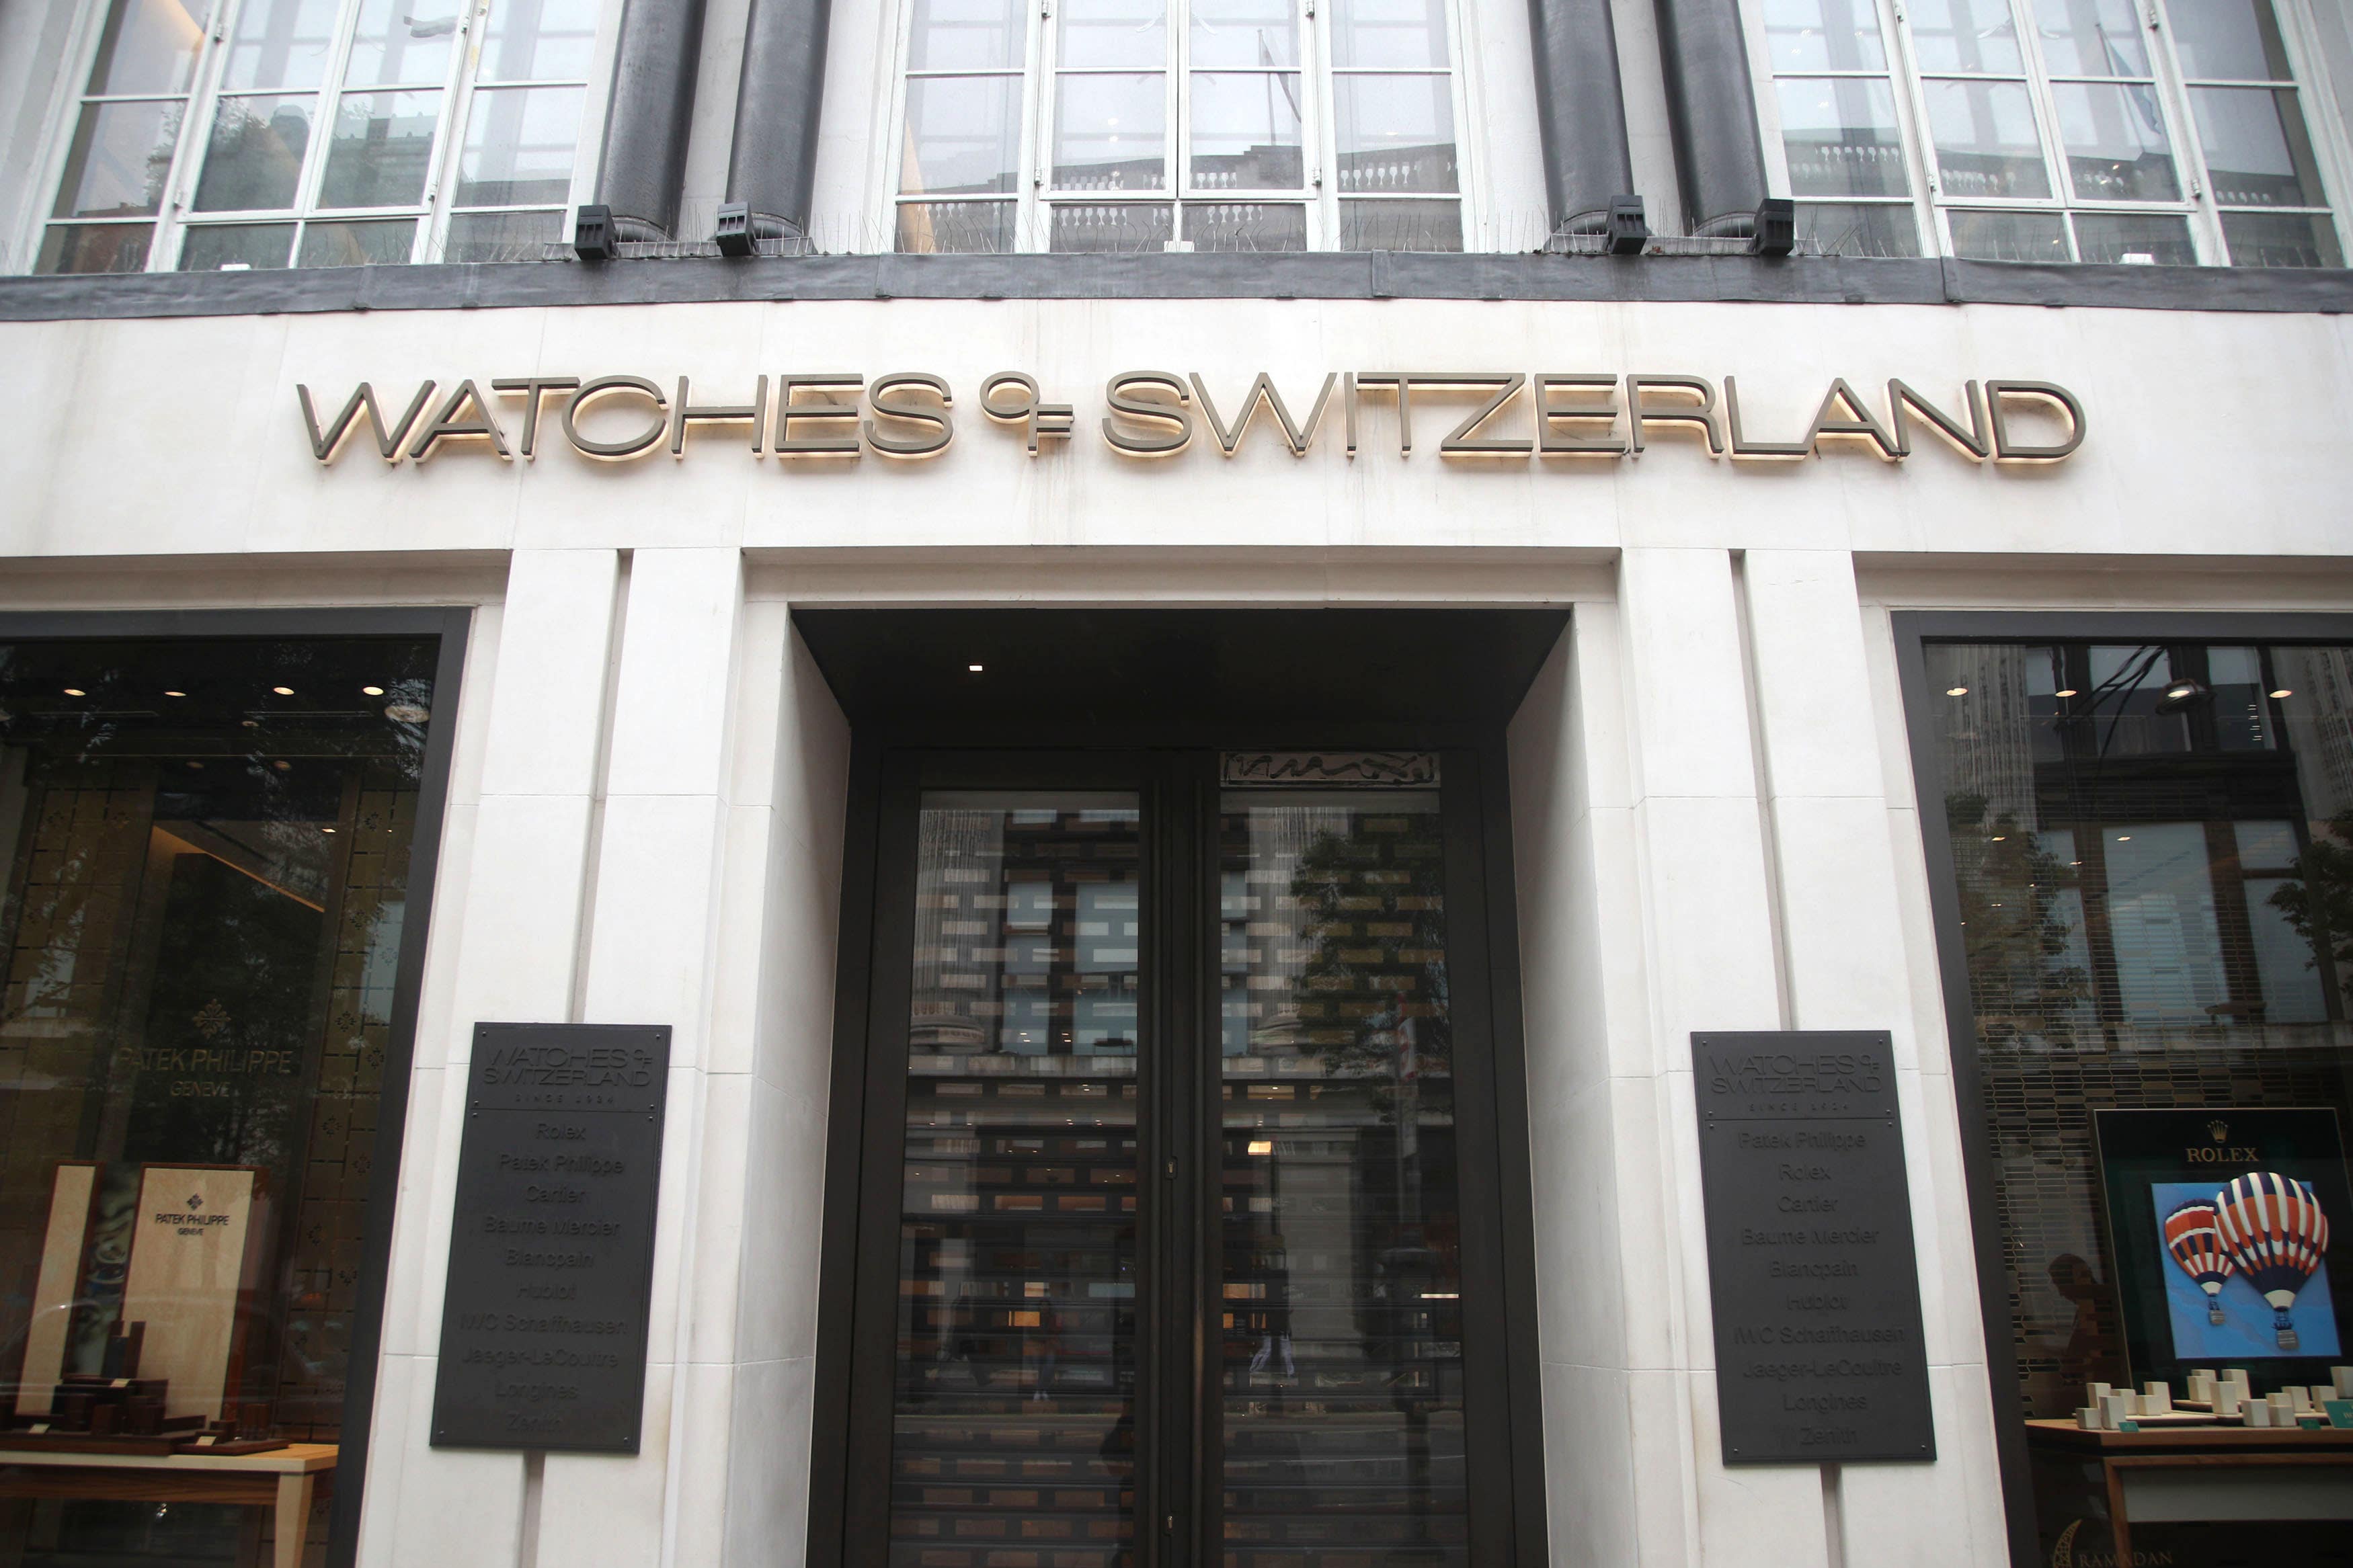 Watches of Switzerland says it is the UK’s largest authorised watch retailer, boasted ‘another record year of revenue and profitability’ (Yui Mok/ PA)